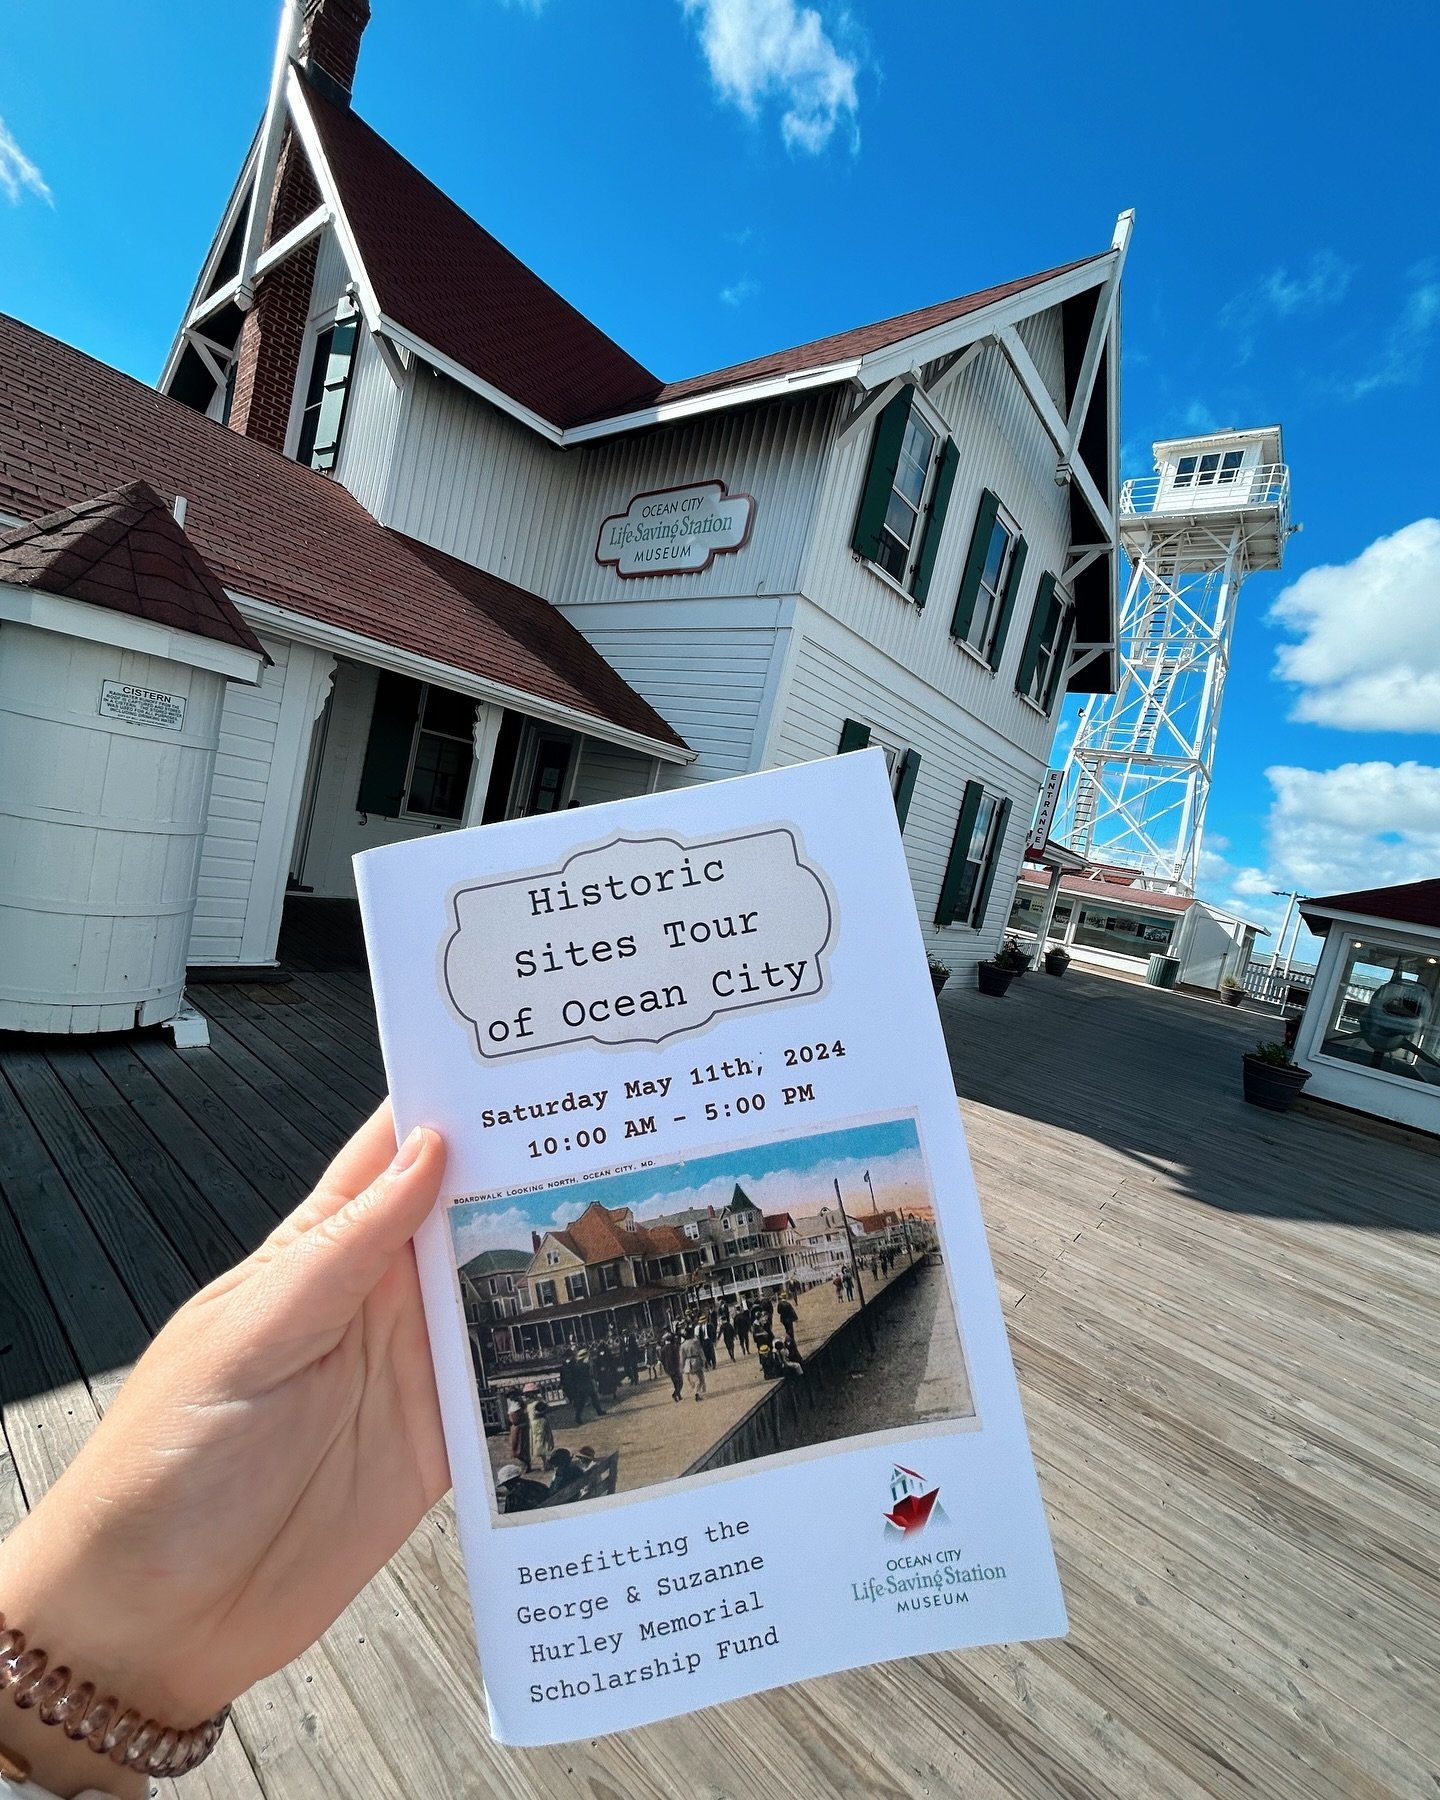 The Historic Sites Tour is taking place today! The weather is beautiful for a walk through downtown Ocean City ☀️ Tickets are still available for the Historic Sites Tour and slots are still available for the guided tours 🎟️ purchase your tickets fro